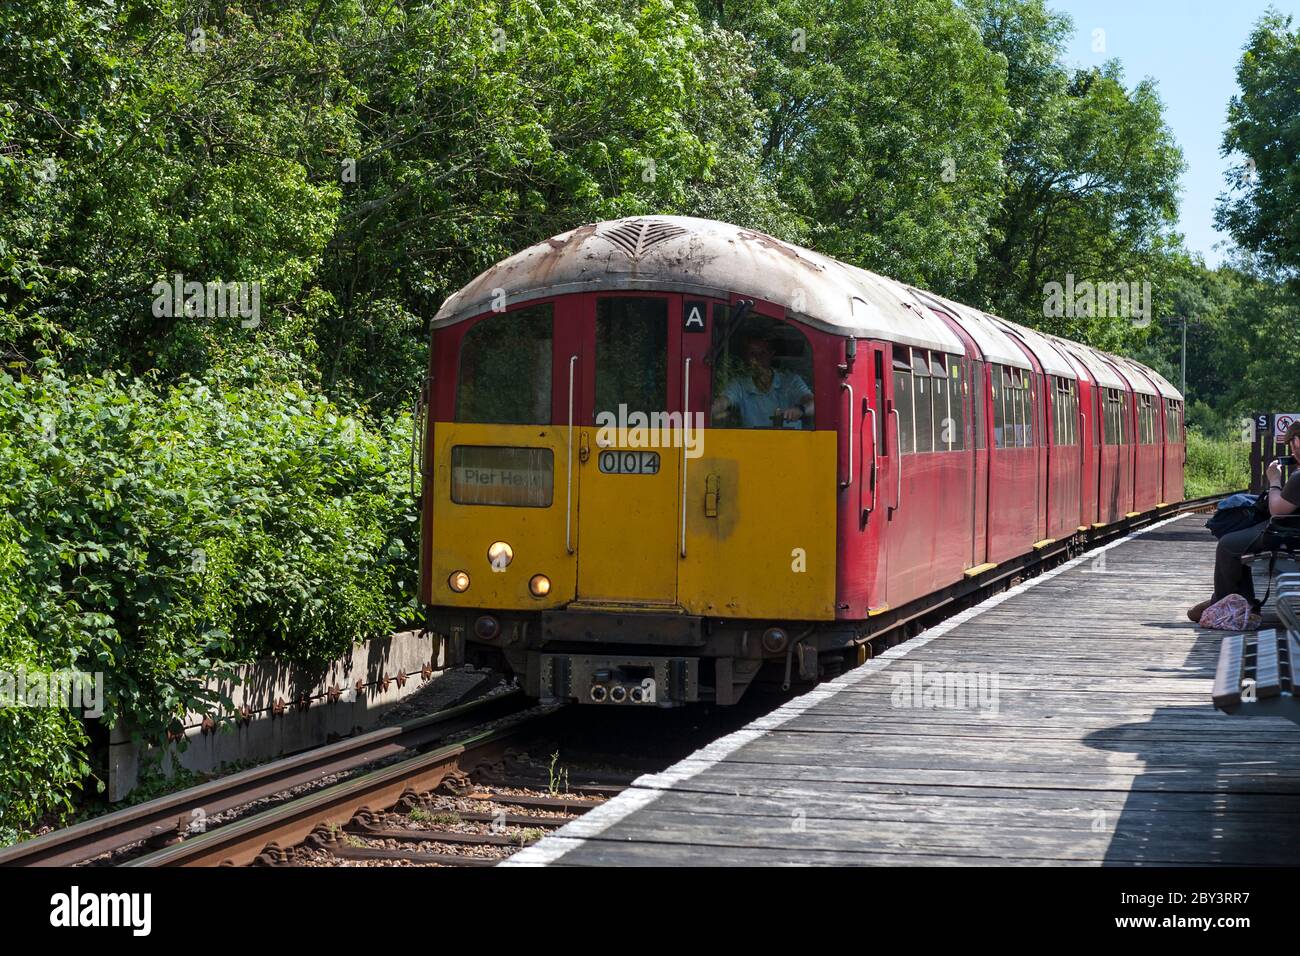 Electric multiple unit approaching Smallbrook Junction, heading for Ryde, Island Line, Isle of Wight, UK.  The train is 1938 London tube train stock Stock Photo